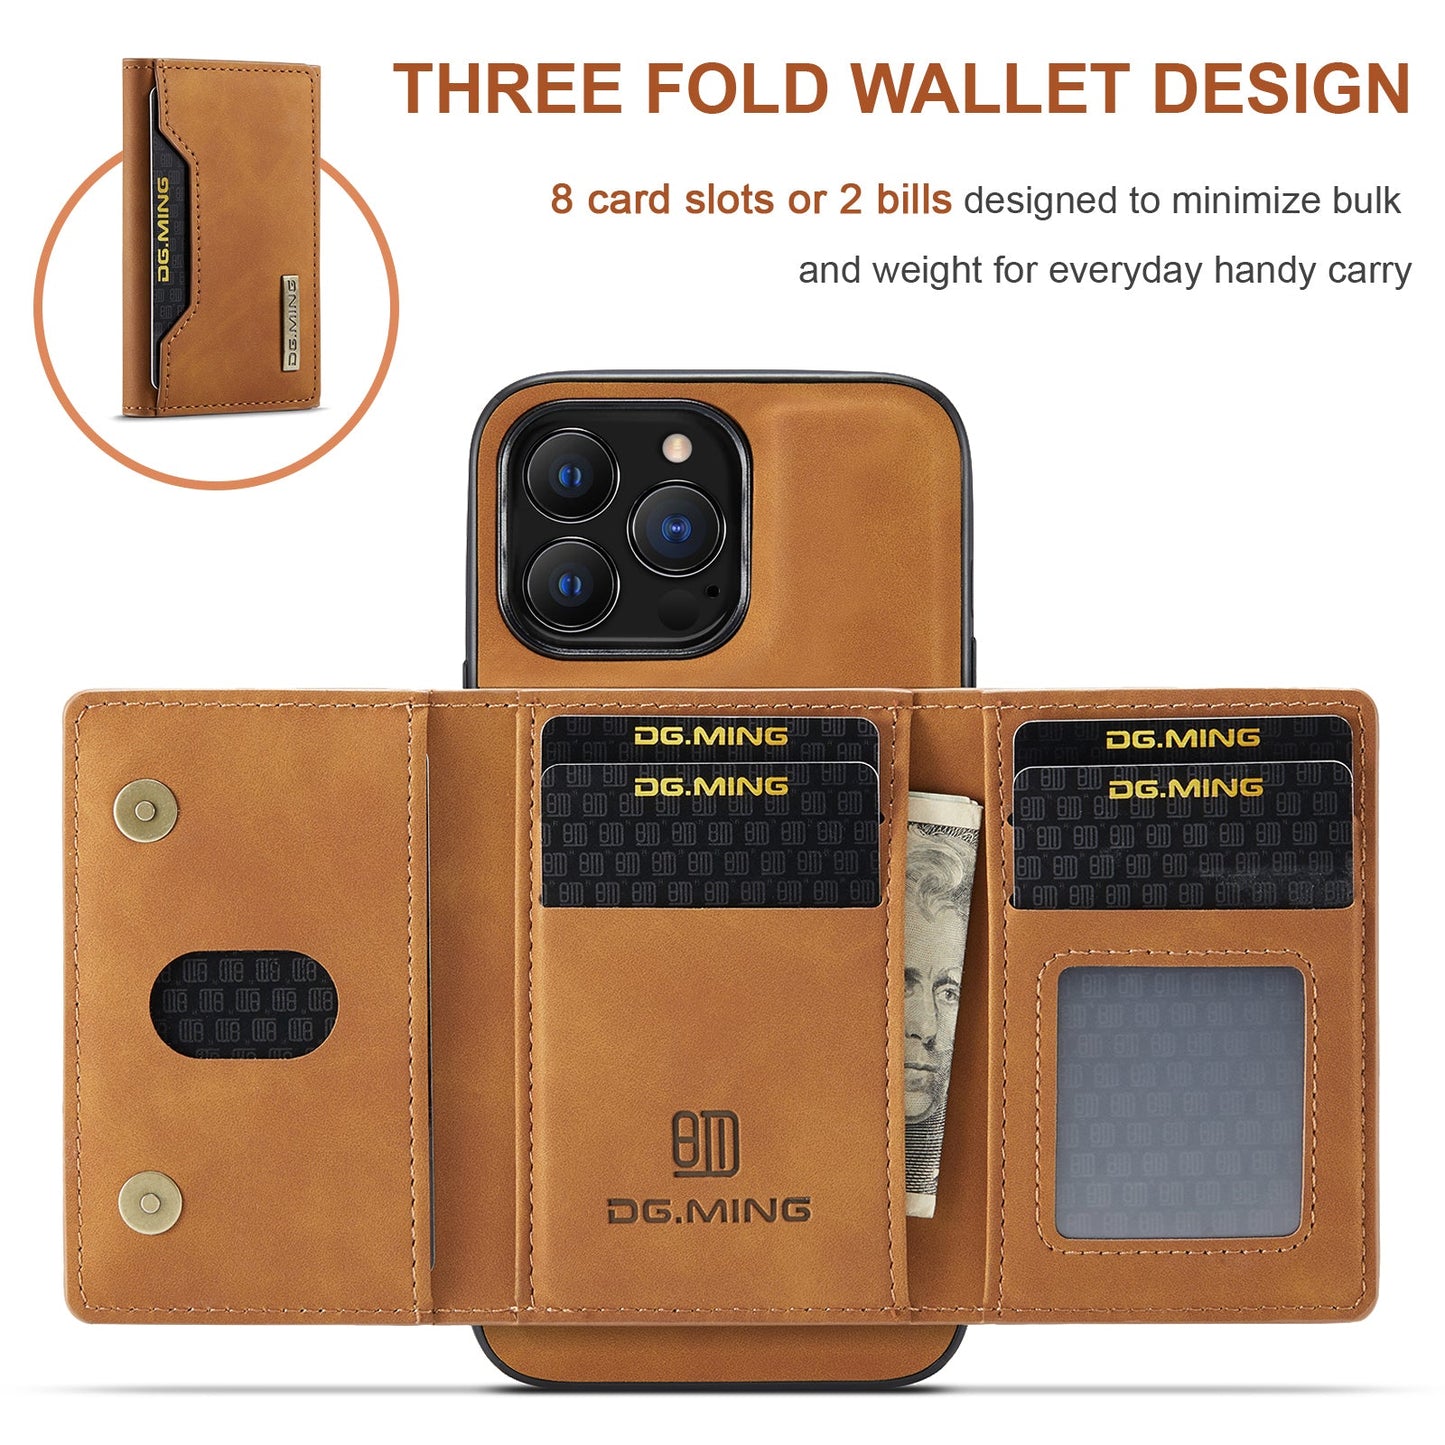 2 in 1 Detachable Leather Wallet Case for iPhone